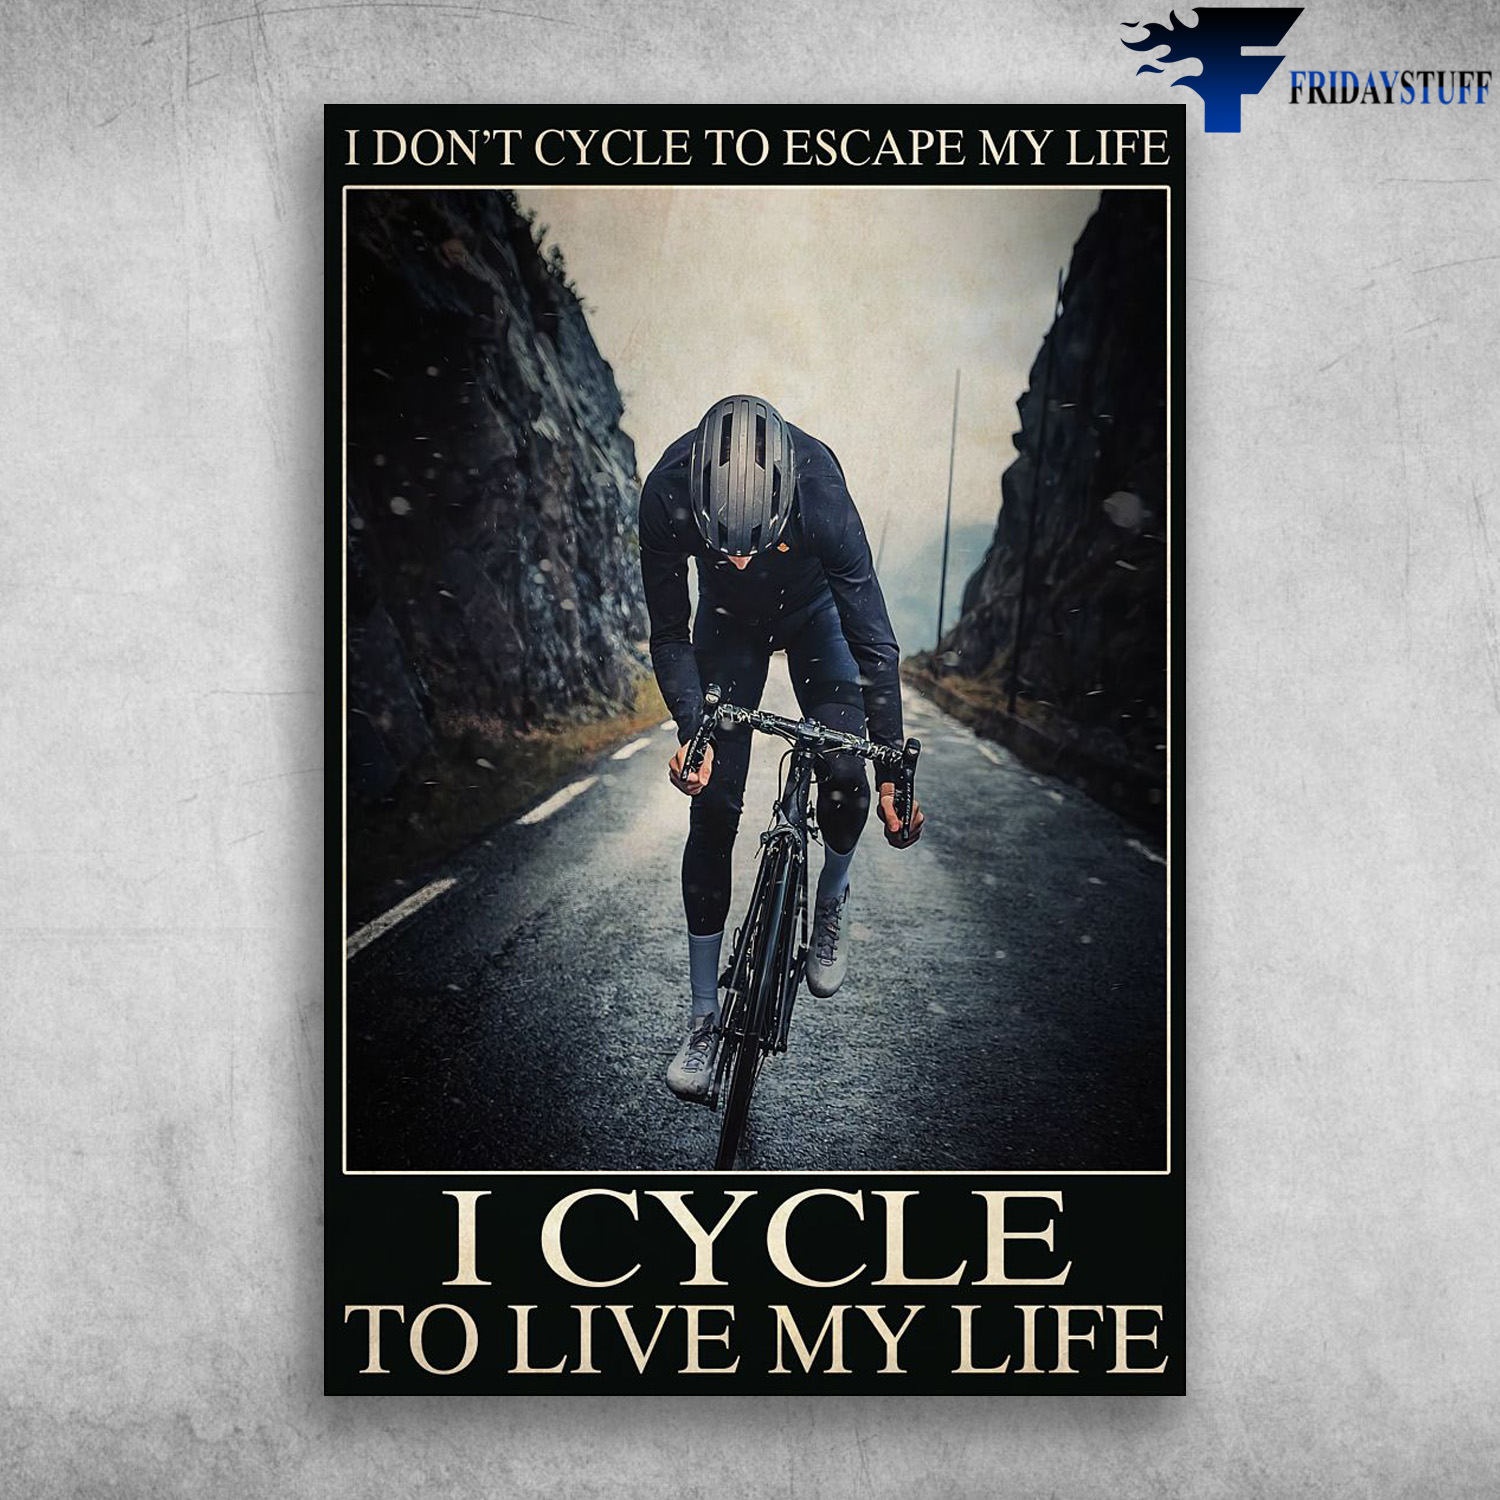 Man Cycling - I Don't Cycle To Escape My Life, I Cycle To Live My Life